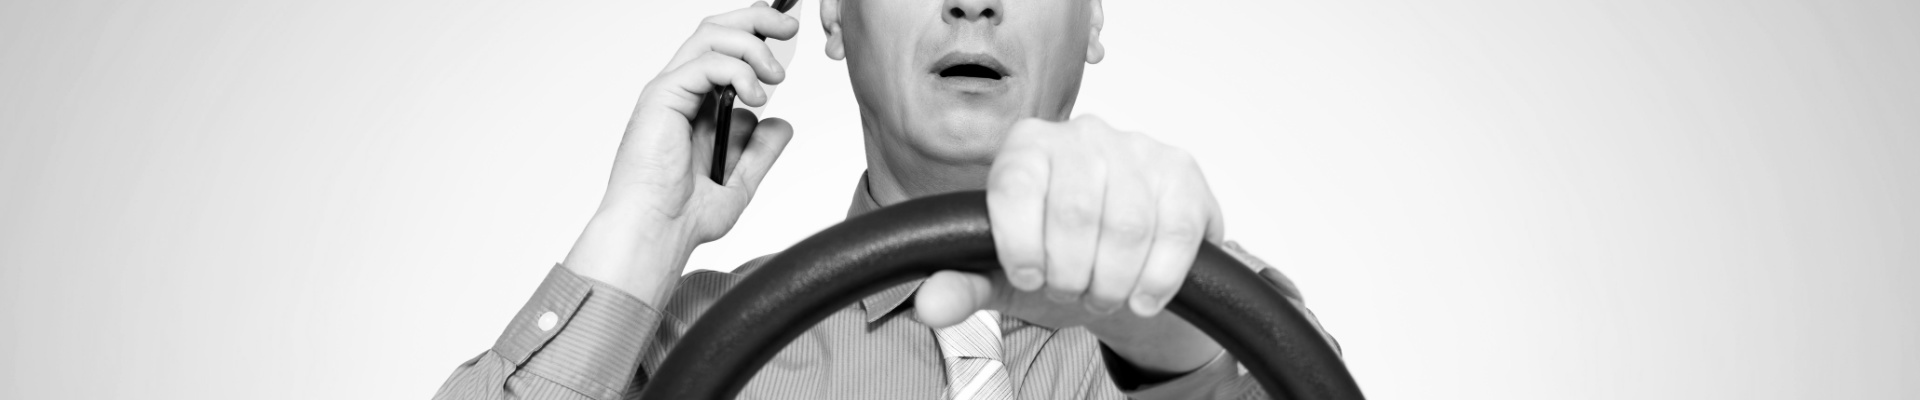 Yuba City Distracted Driving Lawyer